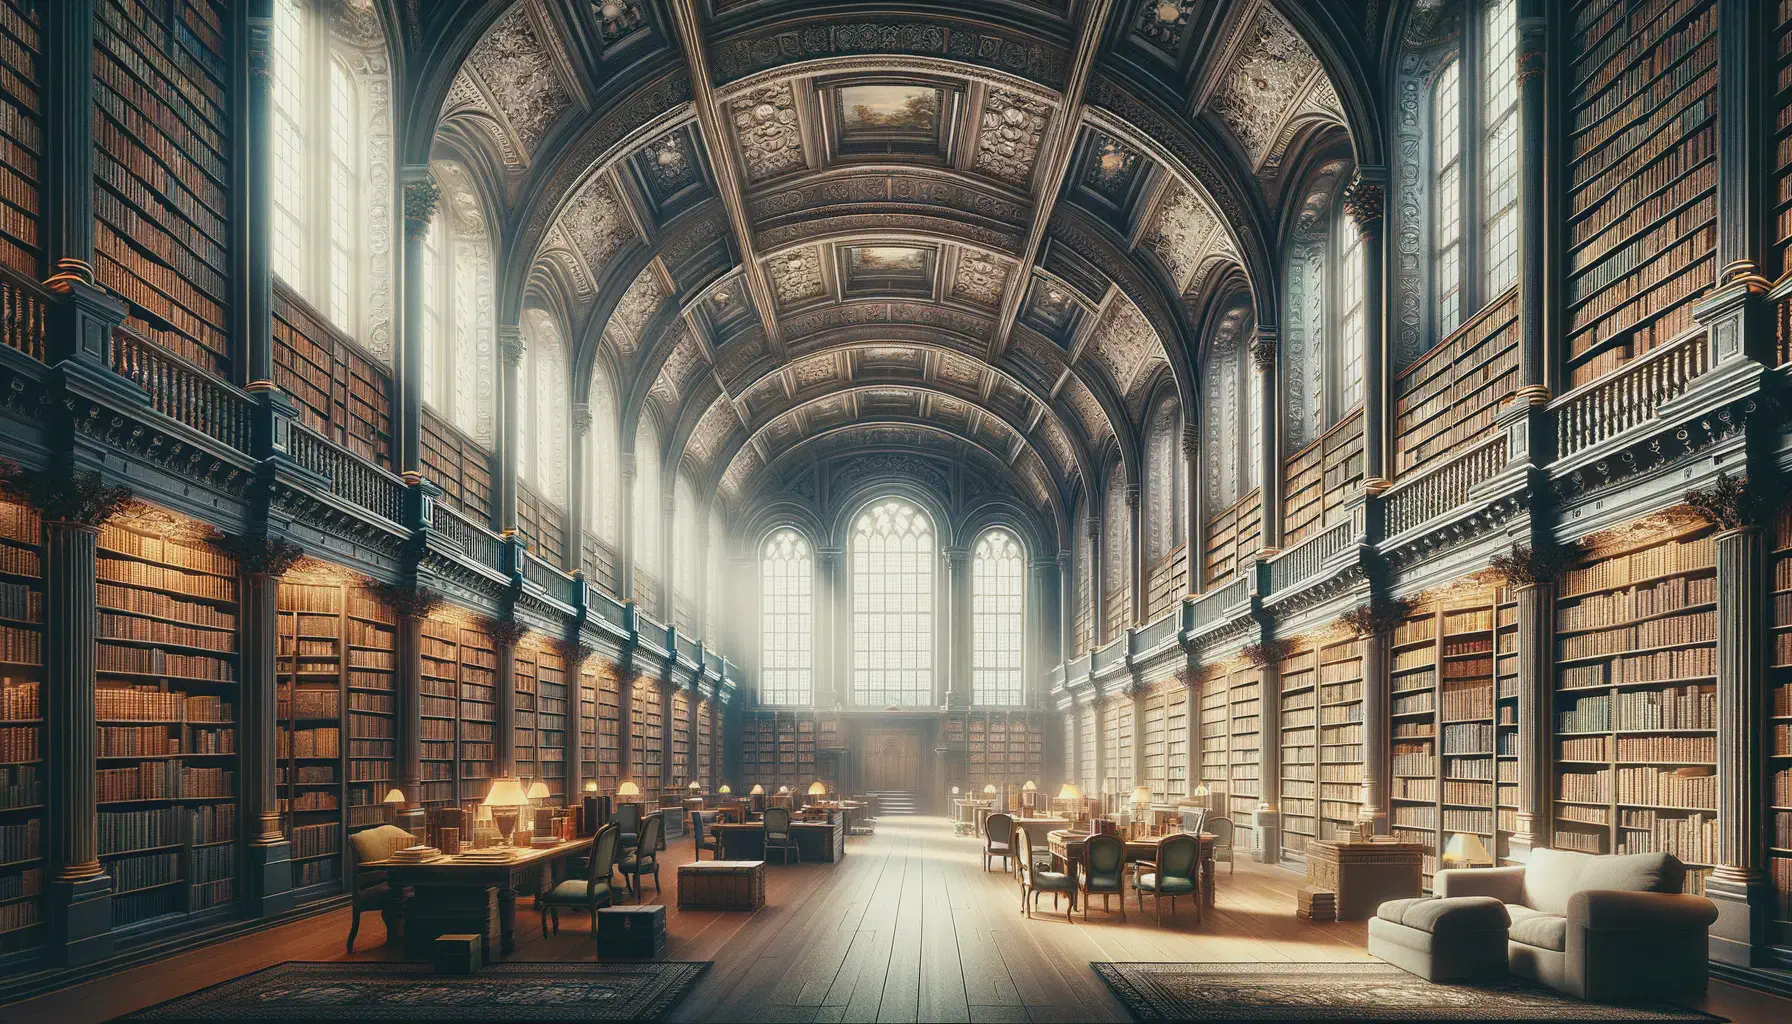 A large library with vaulted ceiling.